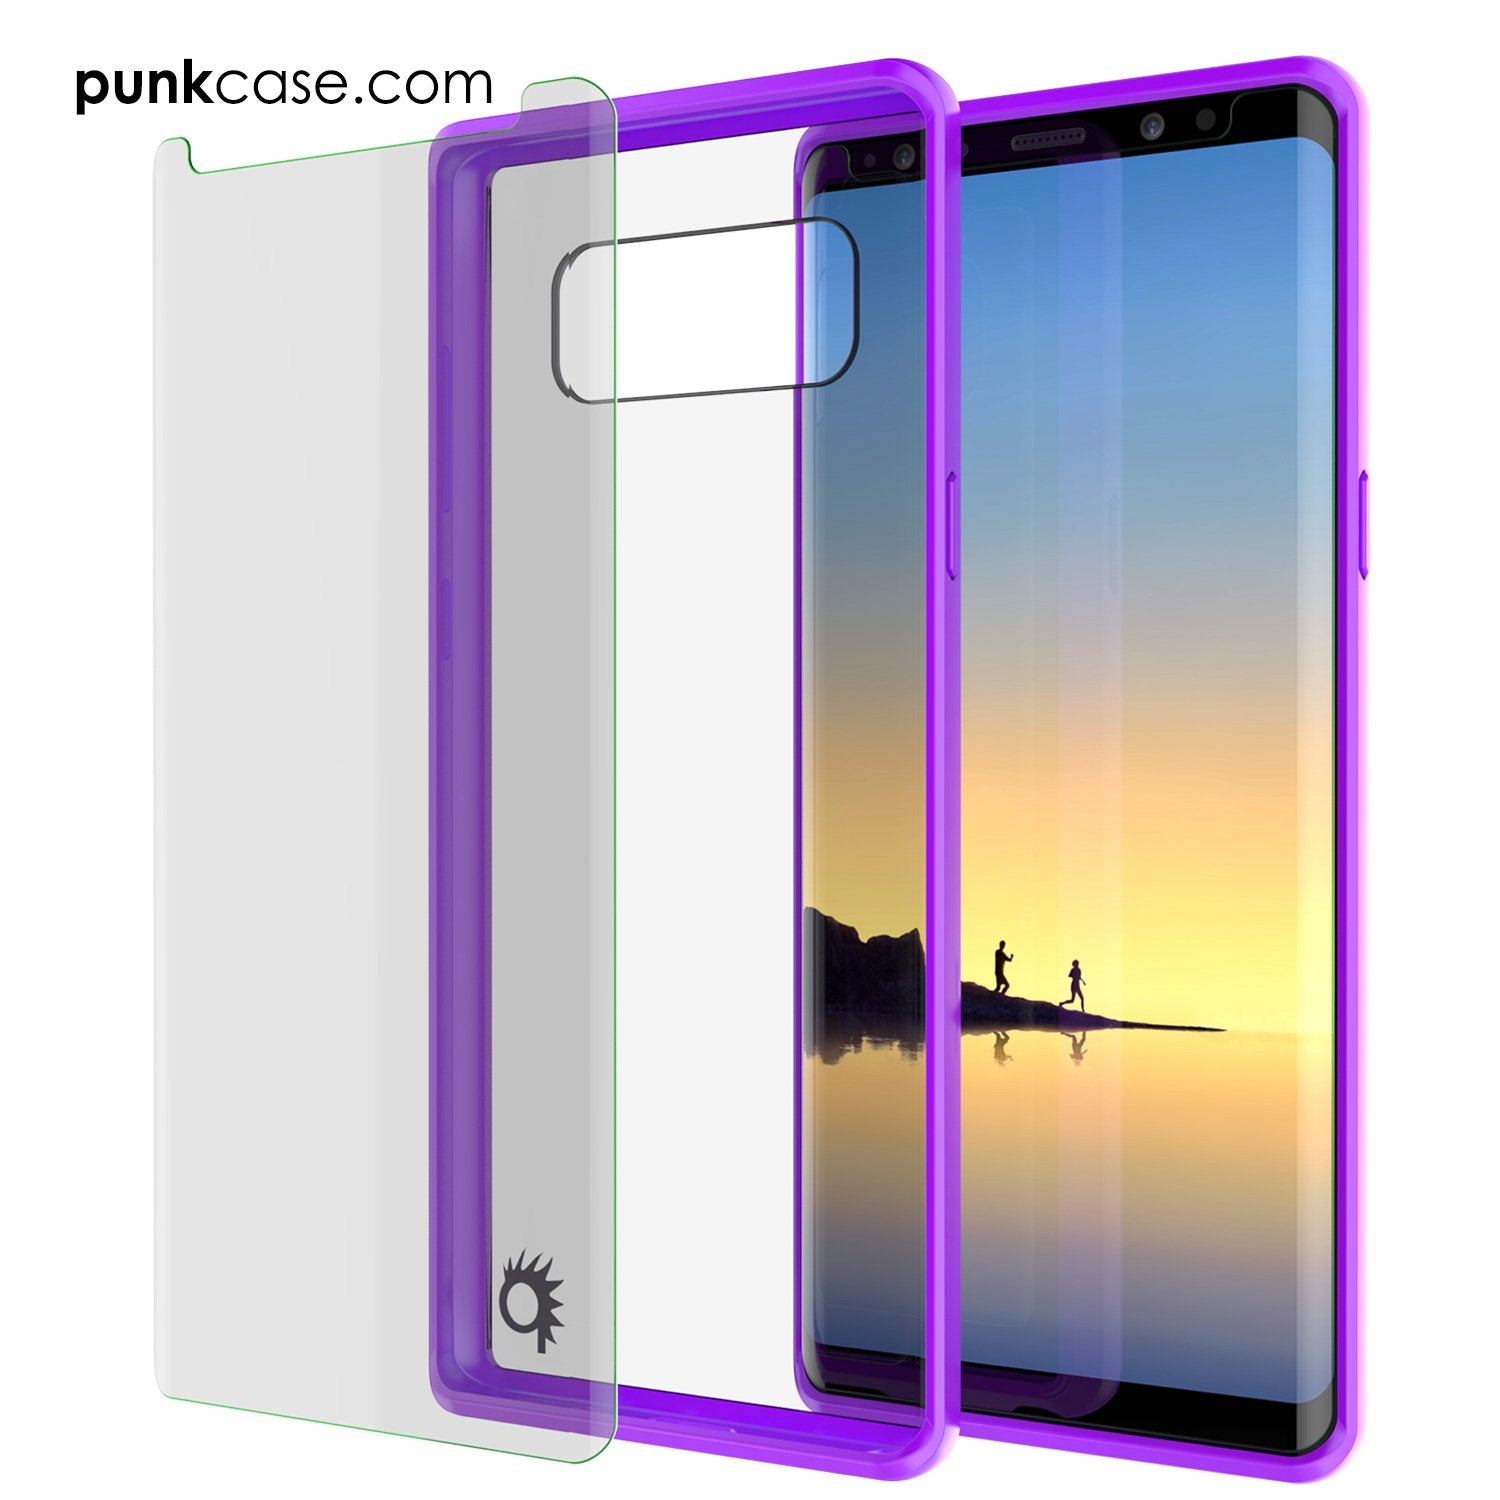 Galaxy Note 8 Case, PUNKcase [LUCID 2.0 Series] [Slim Fit] Armor Cover w/Integrated Anti-Shock System & PUNKSHIELD Screen Protector [Purple]